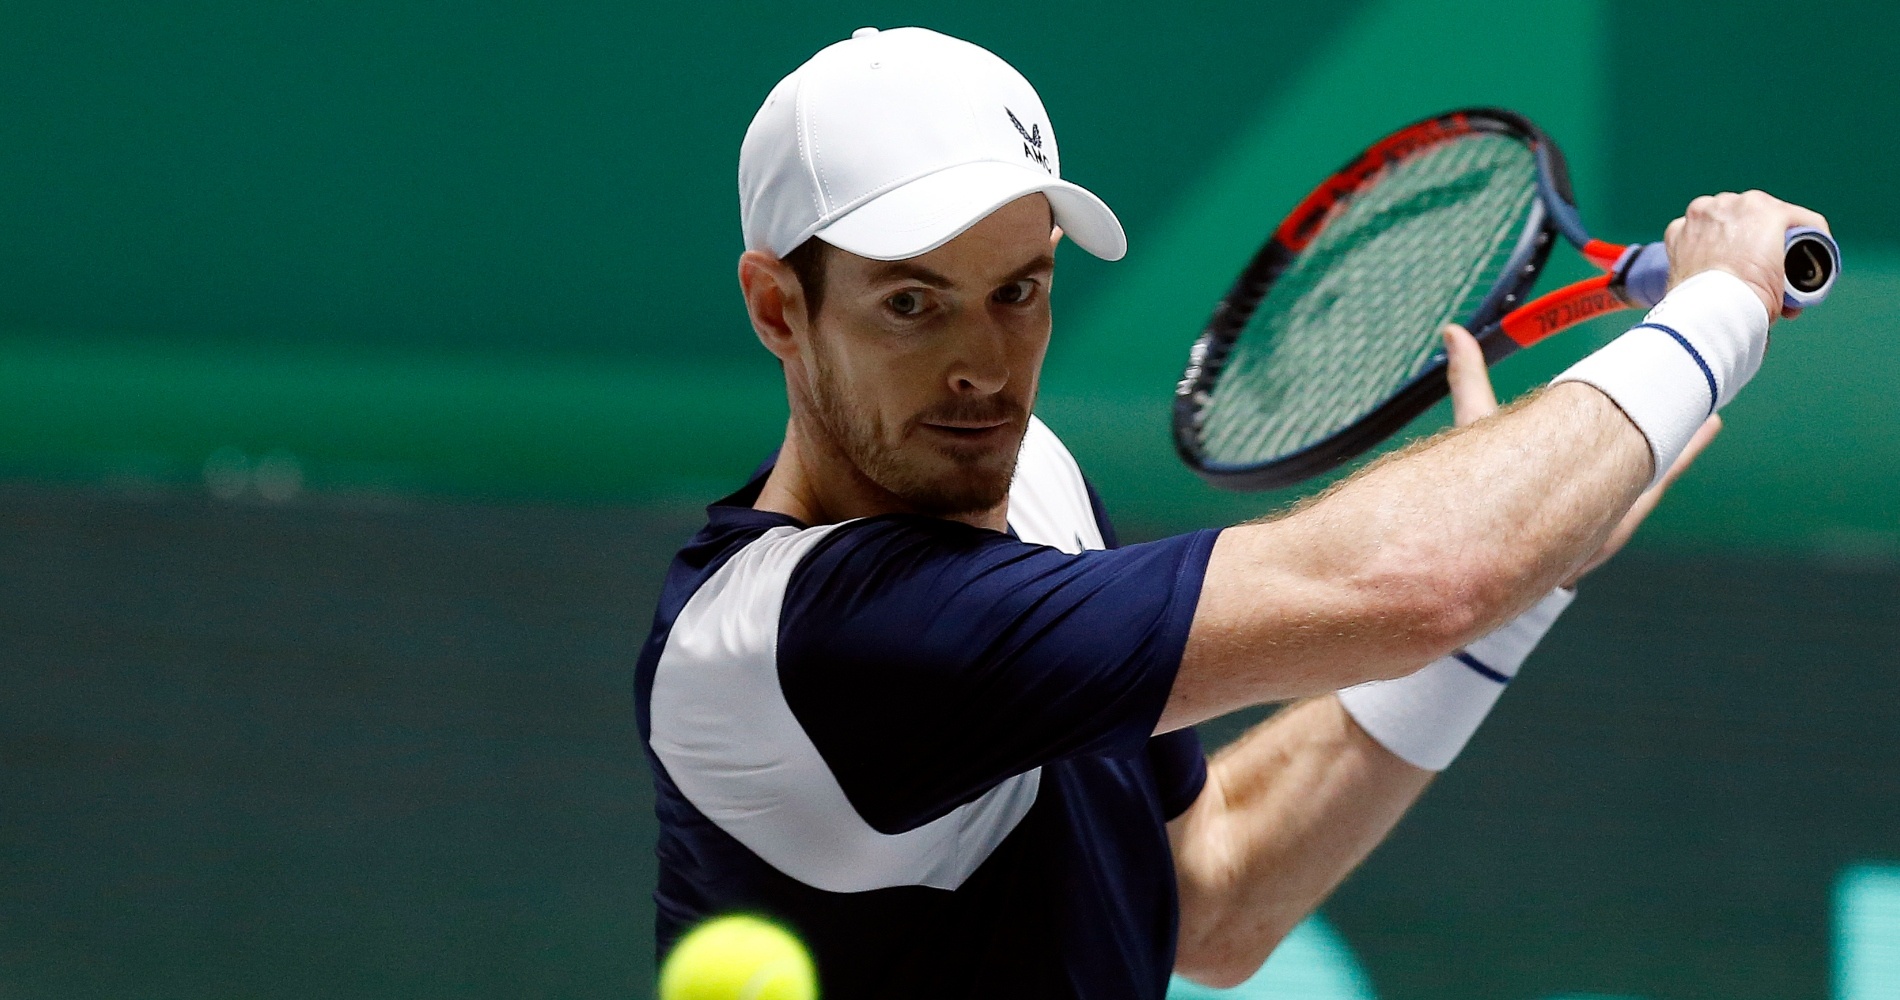 Andy Murray (Great Britain), 2019 Davis Cup